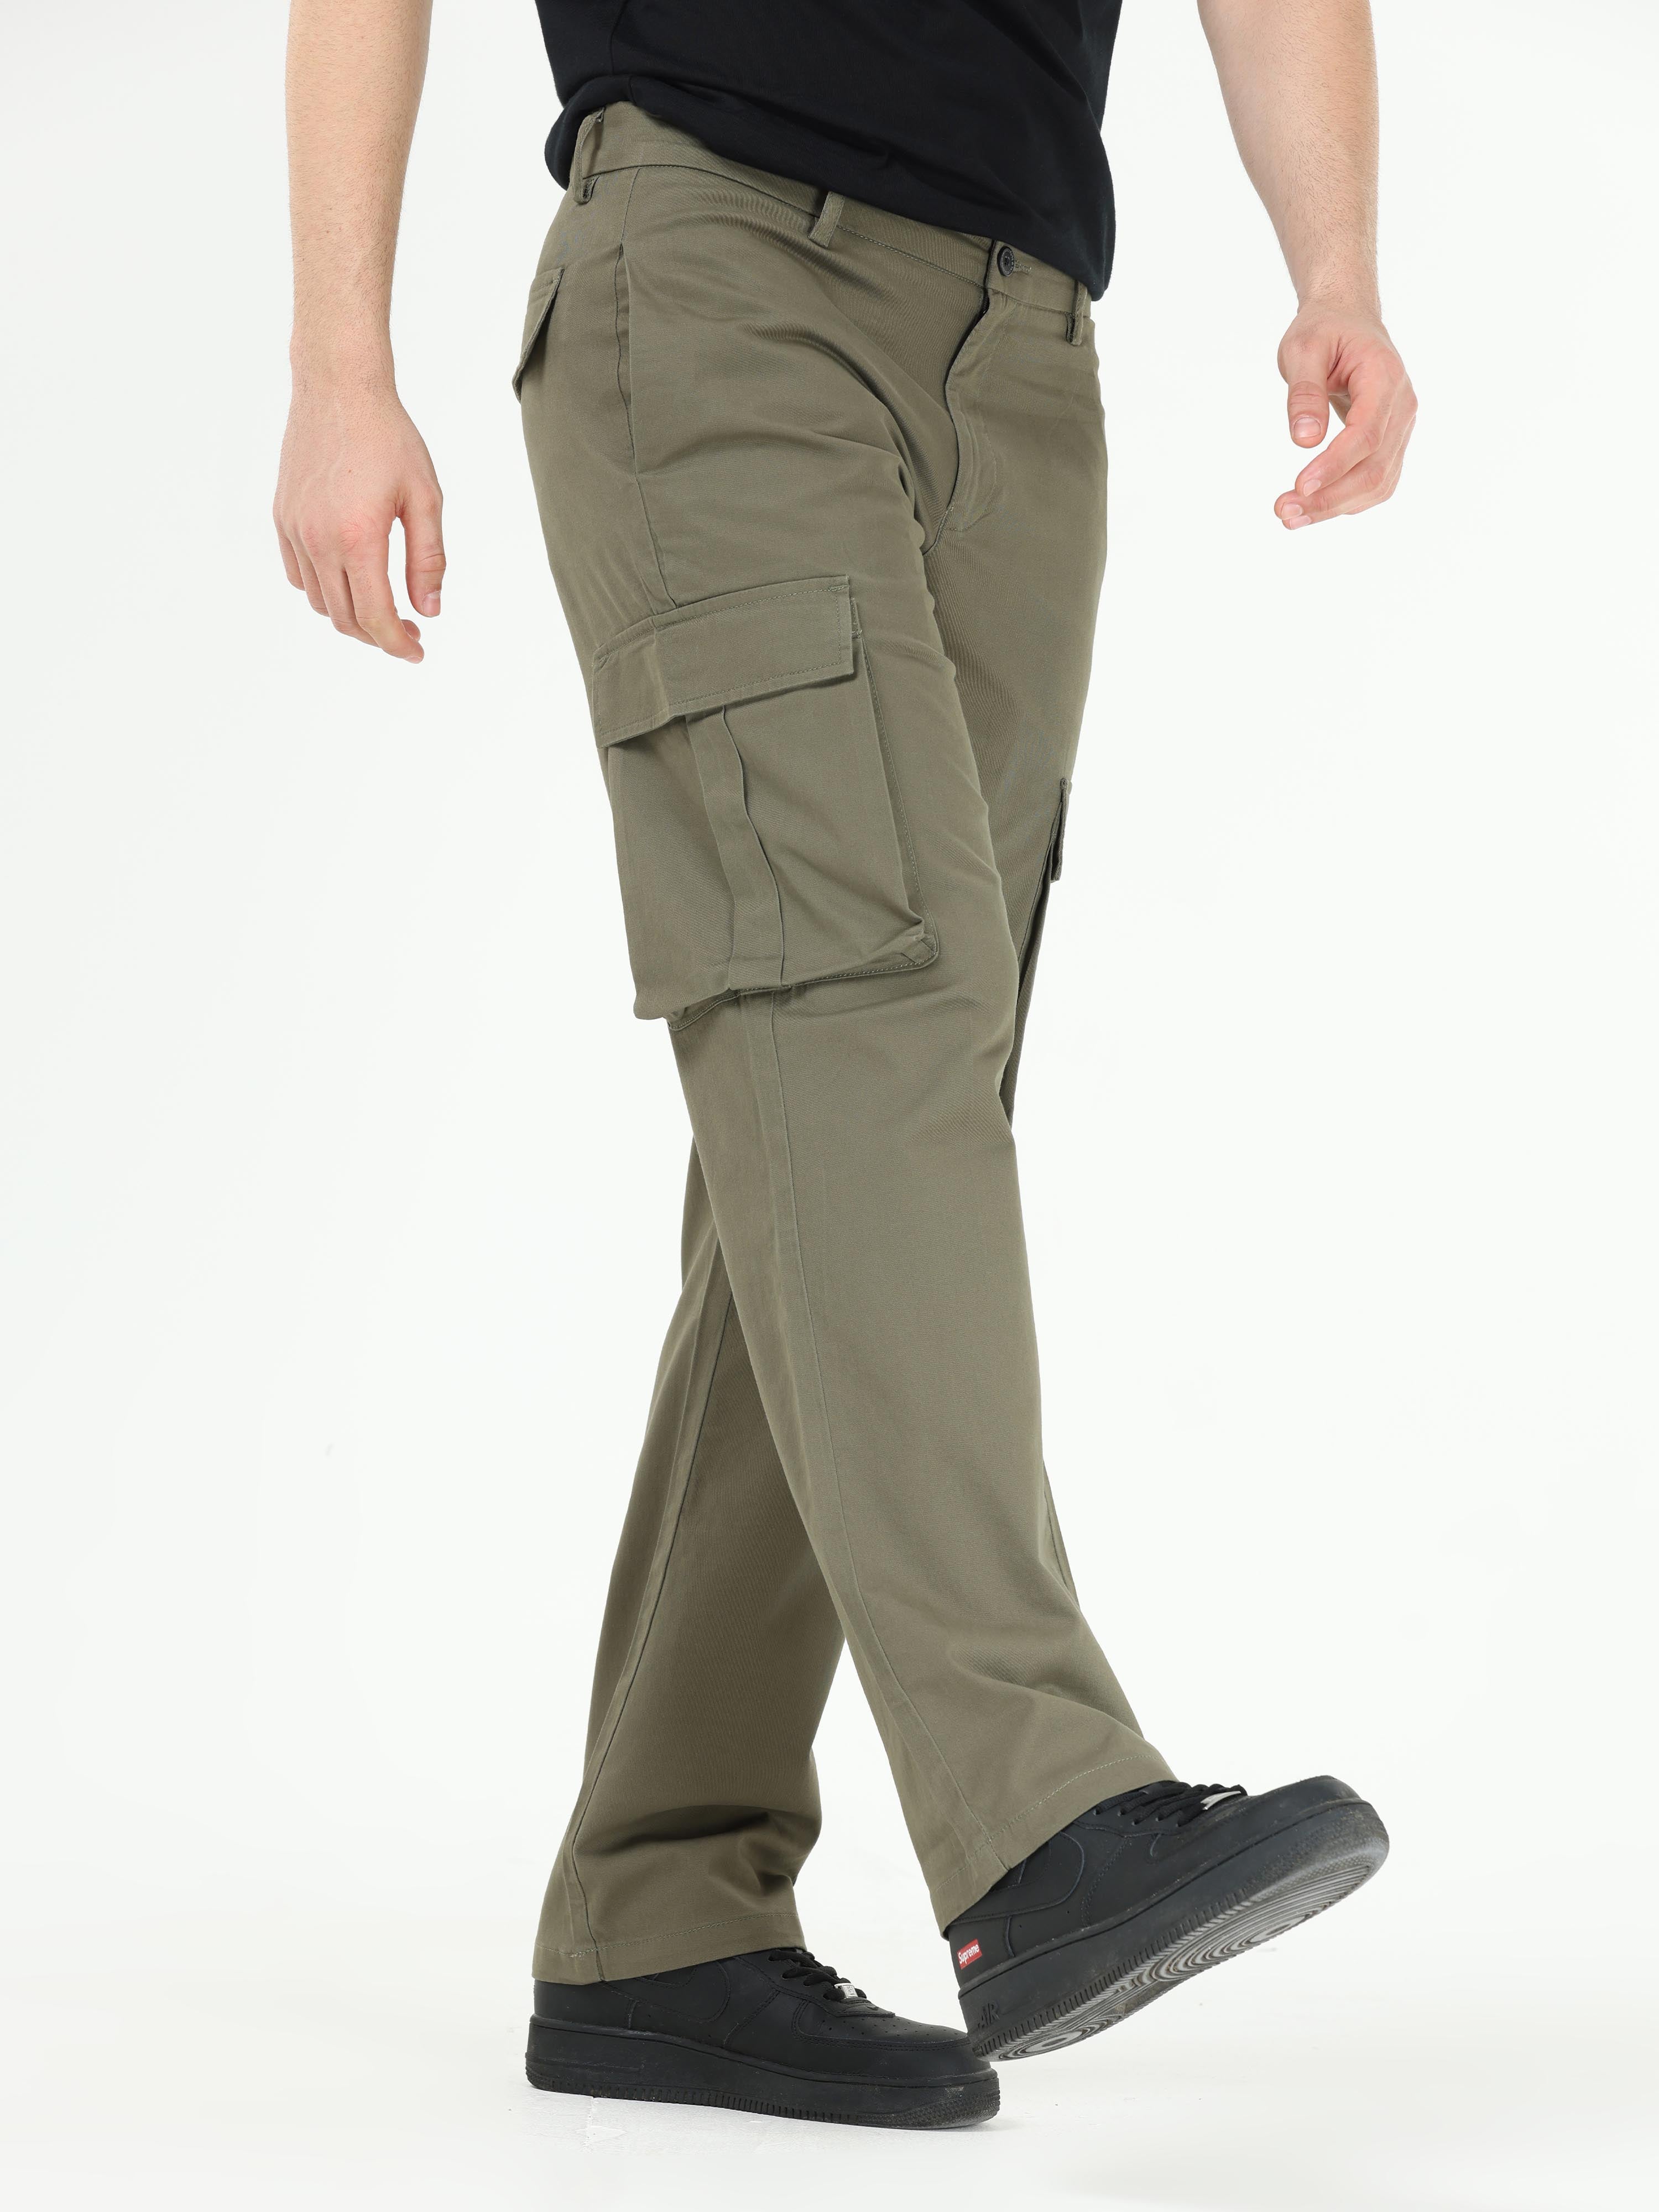 Finest Twill Olive Baggy Fit Cargo